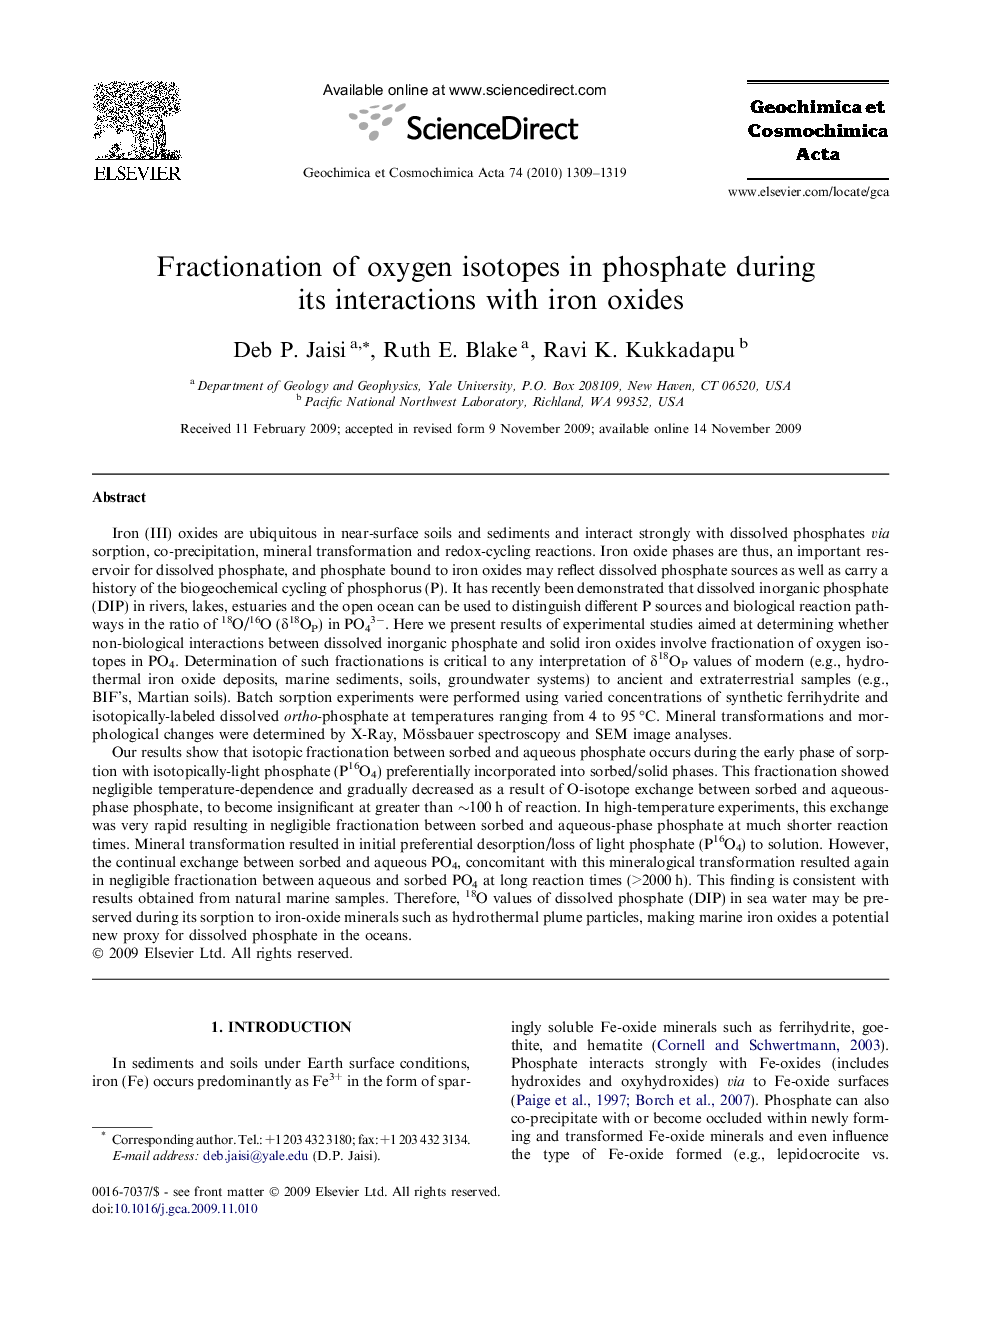 Fractionation of oxygen isotopes in phosphate during its interactions with iron oxides